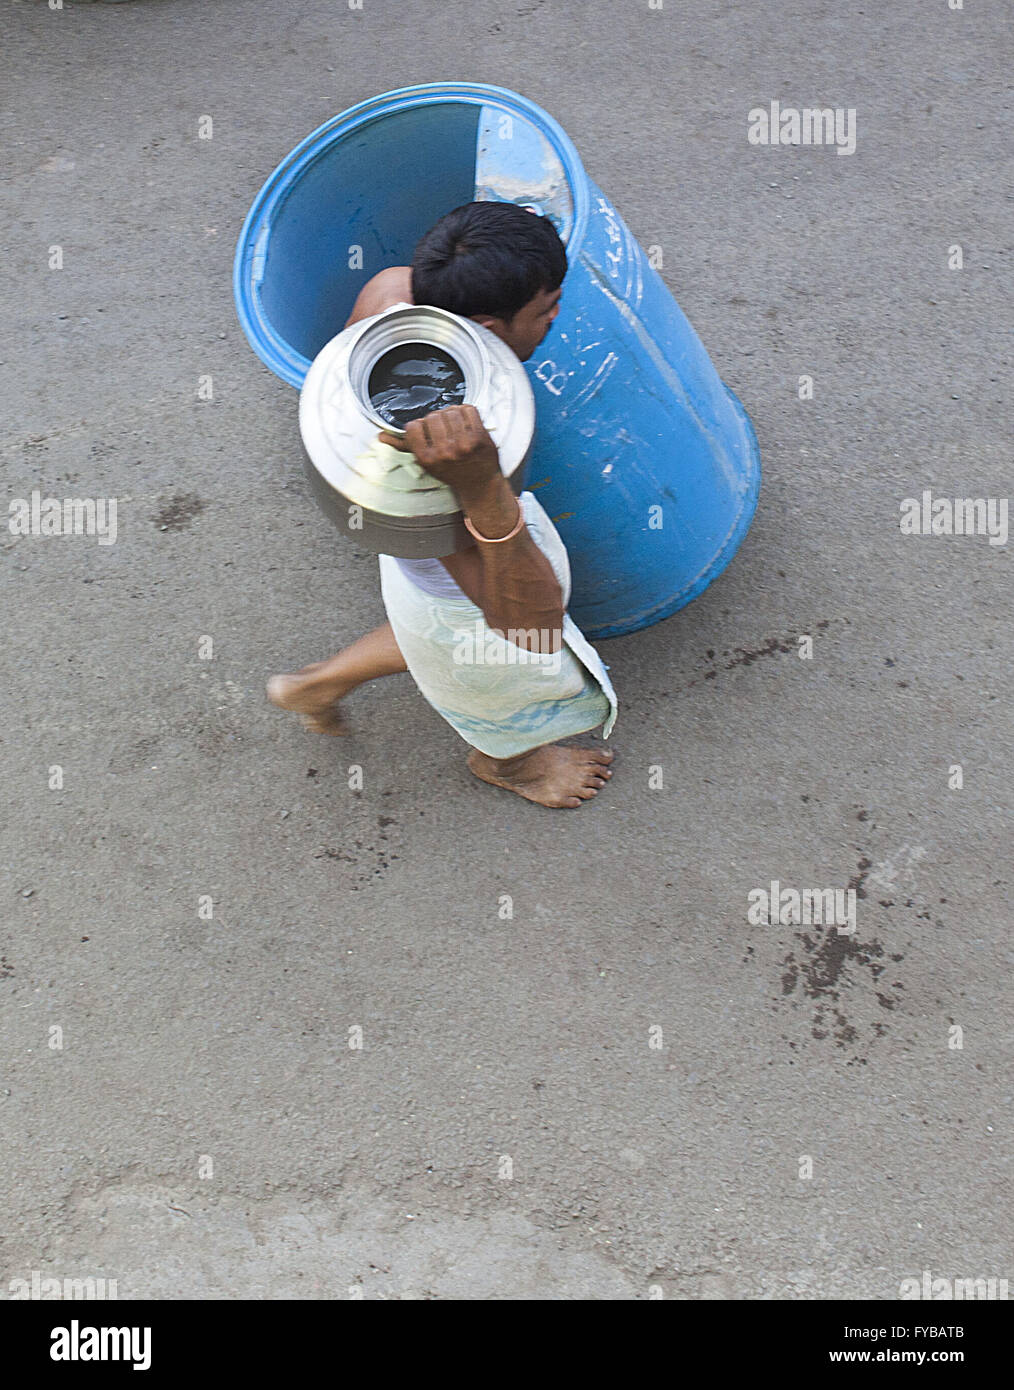 Latur, Maharashtra. 21st Apr, 2016. 21 April 2016 - Latur - INDIA.A person carries water from a water tanker in Latur. © Subhash Sharma/ZUMA Wire/Alamy Live News Stock Photo